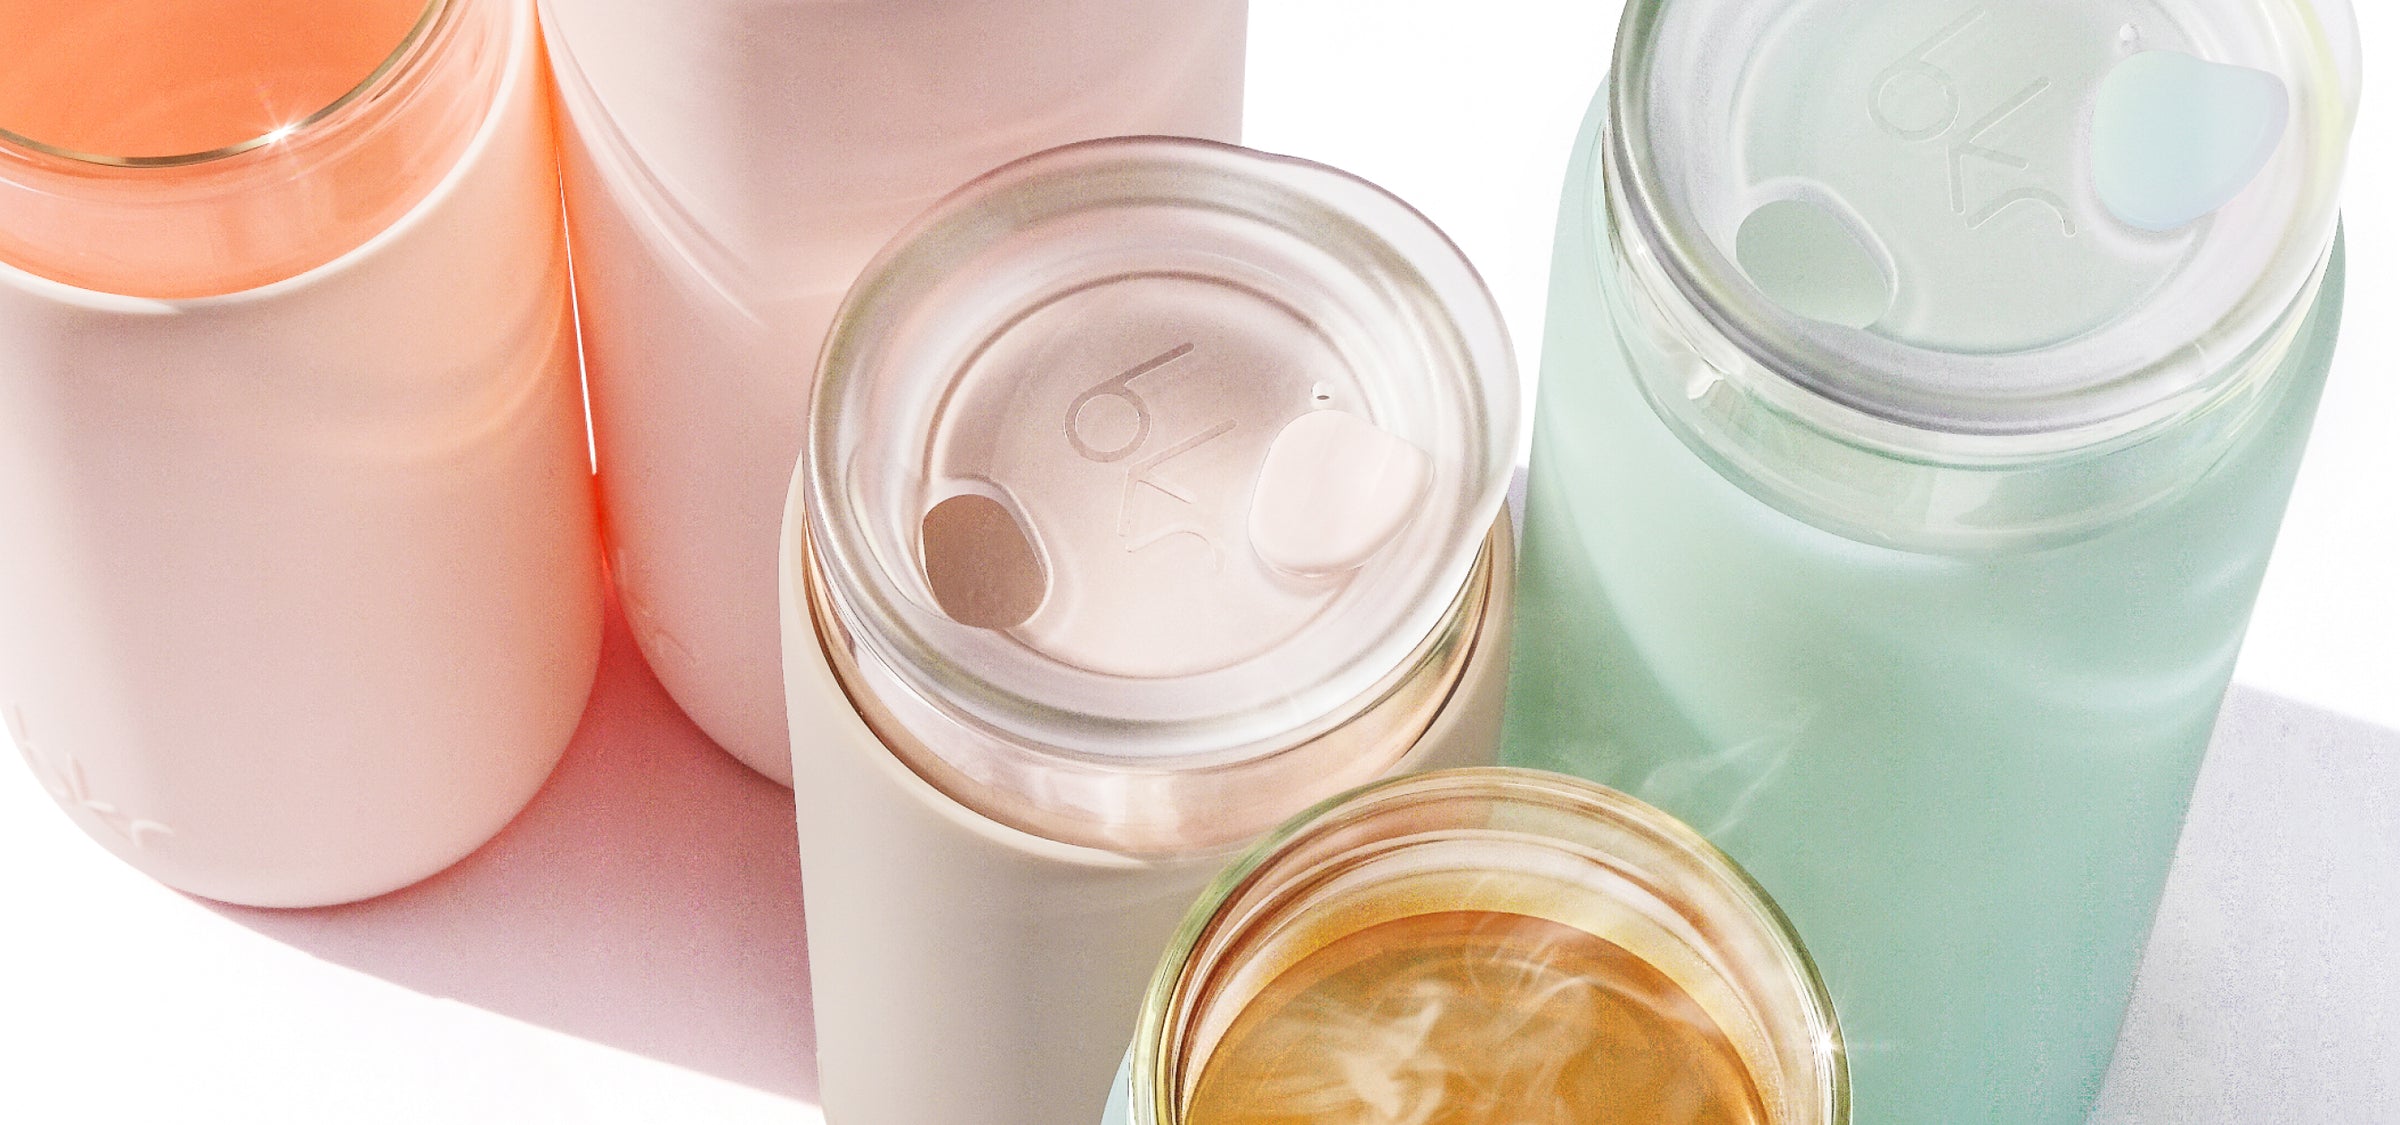 bkr glass double-walled insulated glass tumblers with silicone sleeves in opaque ballet pale peachy pink, opaque light fawn beige, and sheer mint sea glass.